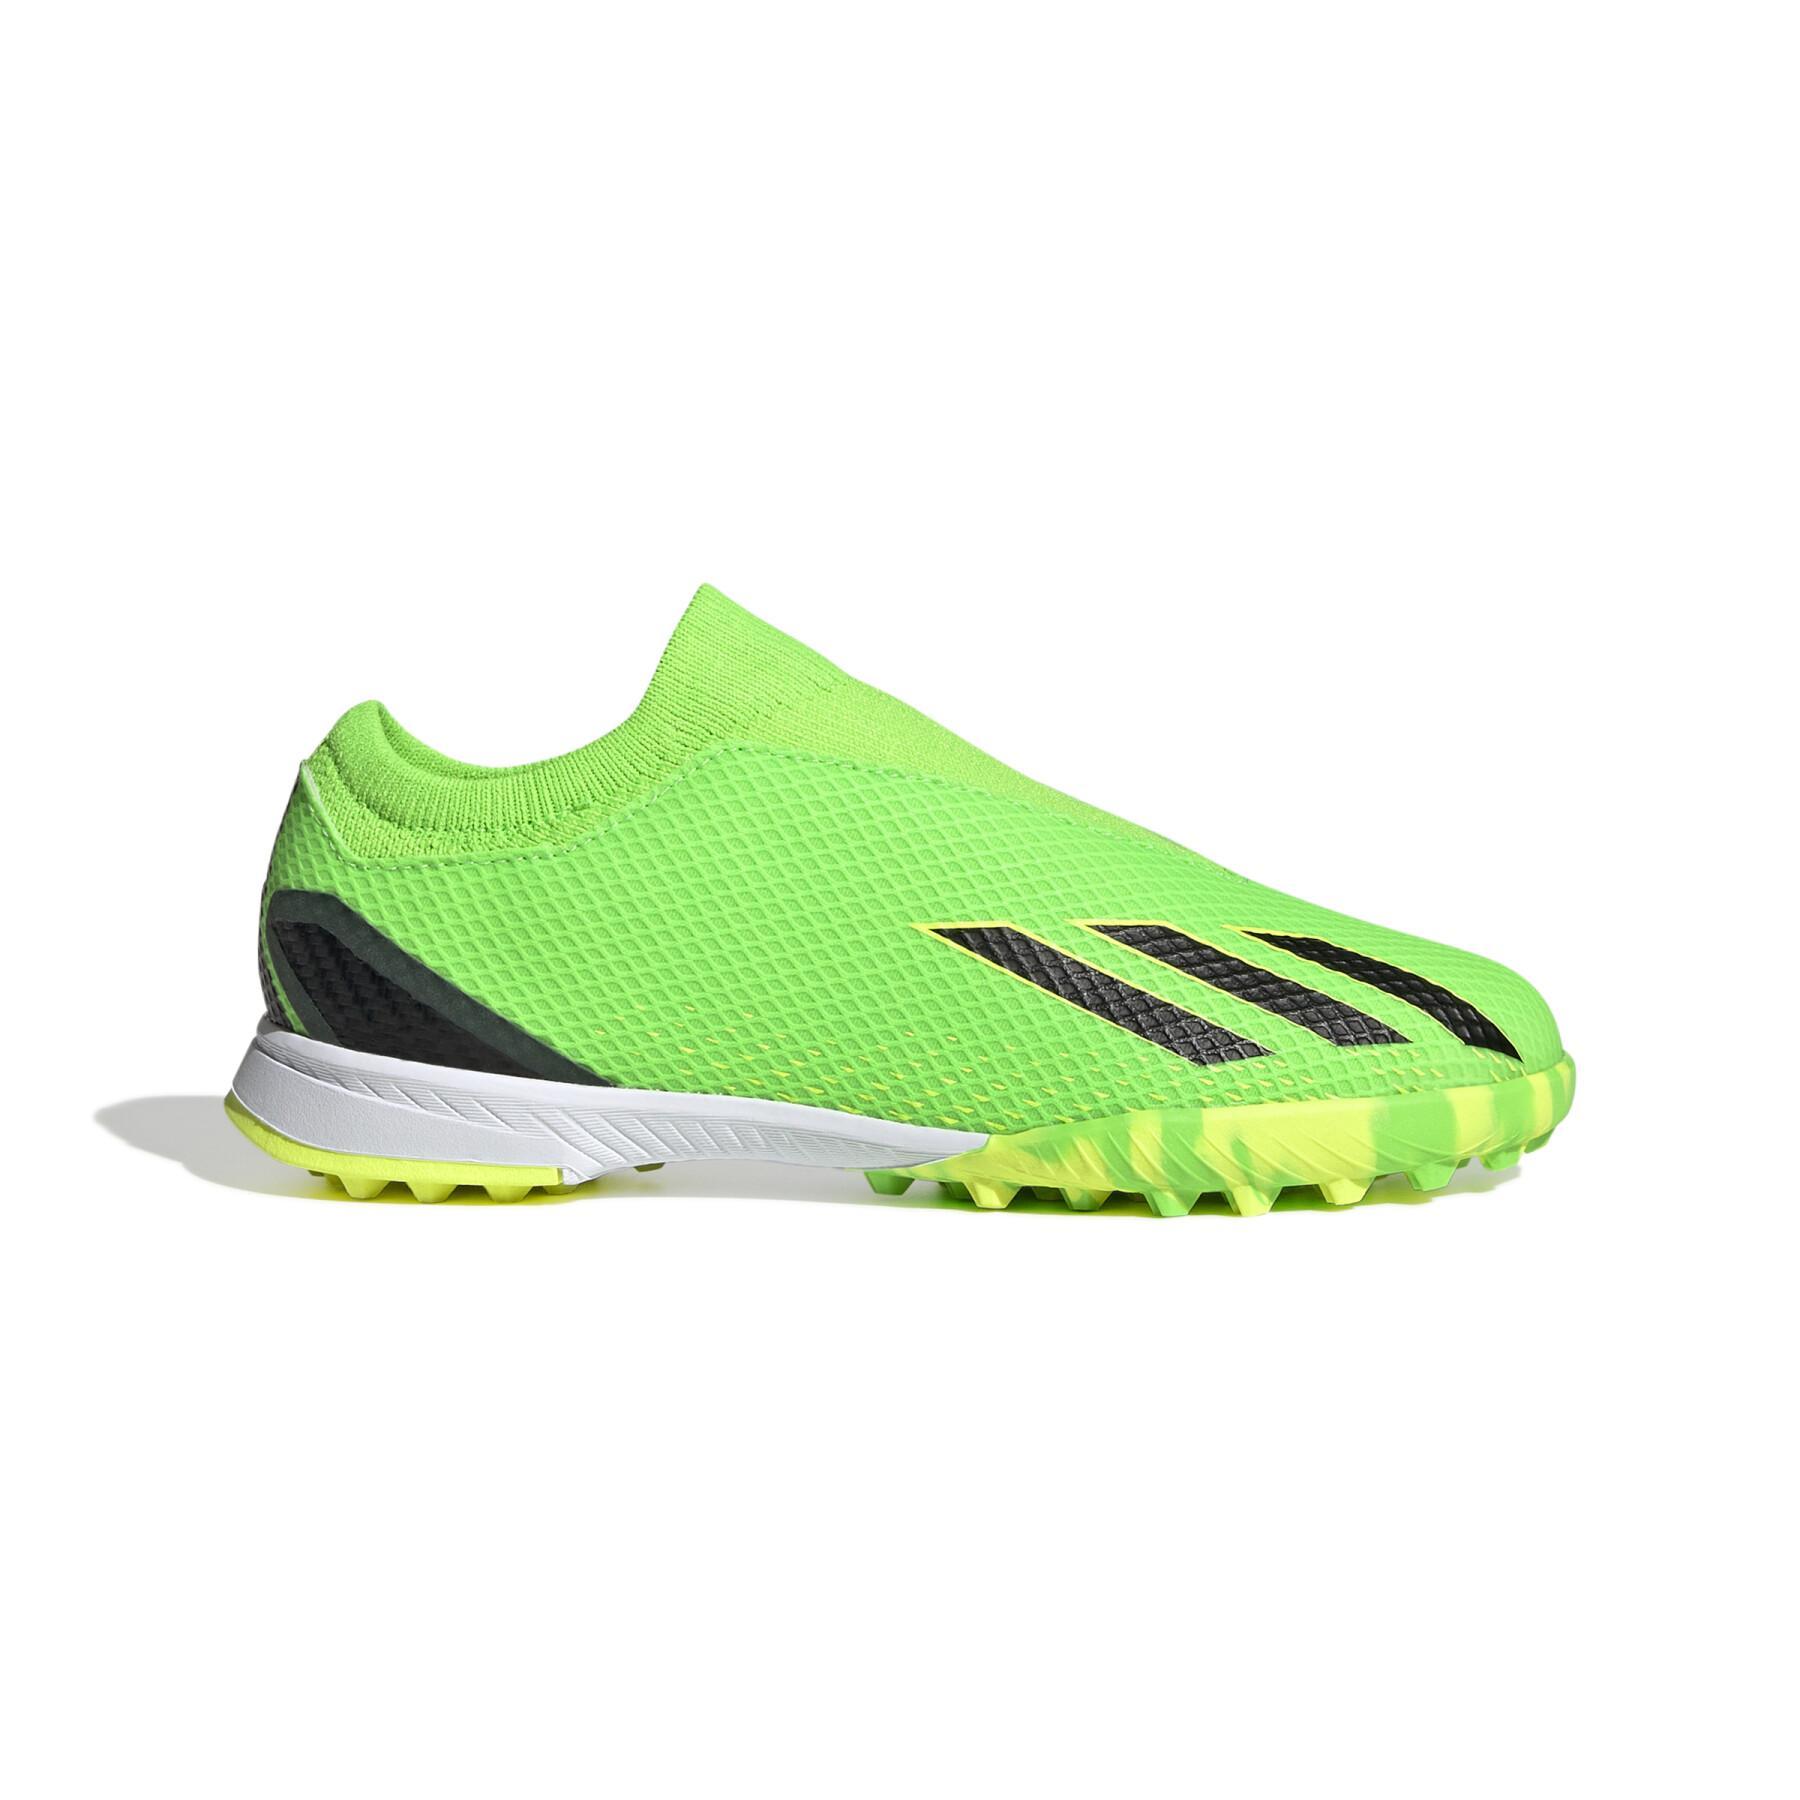 Soccer shoes without laces for children adidas X Speedportal.3 Turf - Game Data Pack